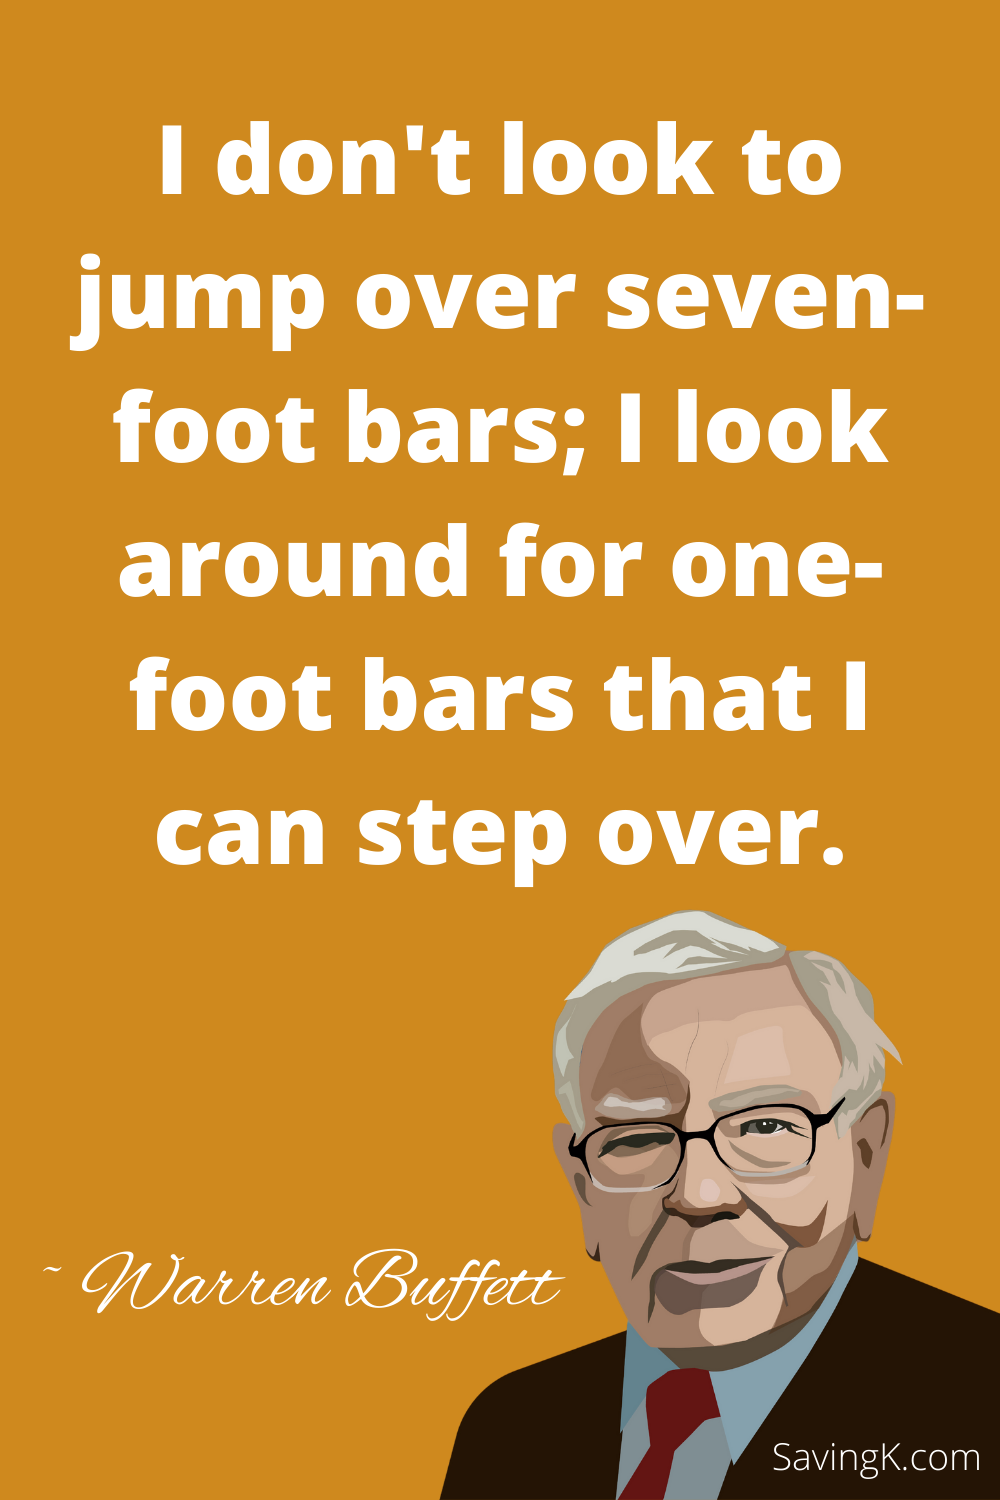 I don't look to jump over seven-foot bars: I look around for one-foot bars that I can step over.